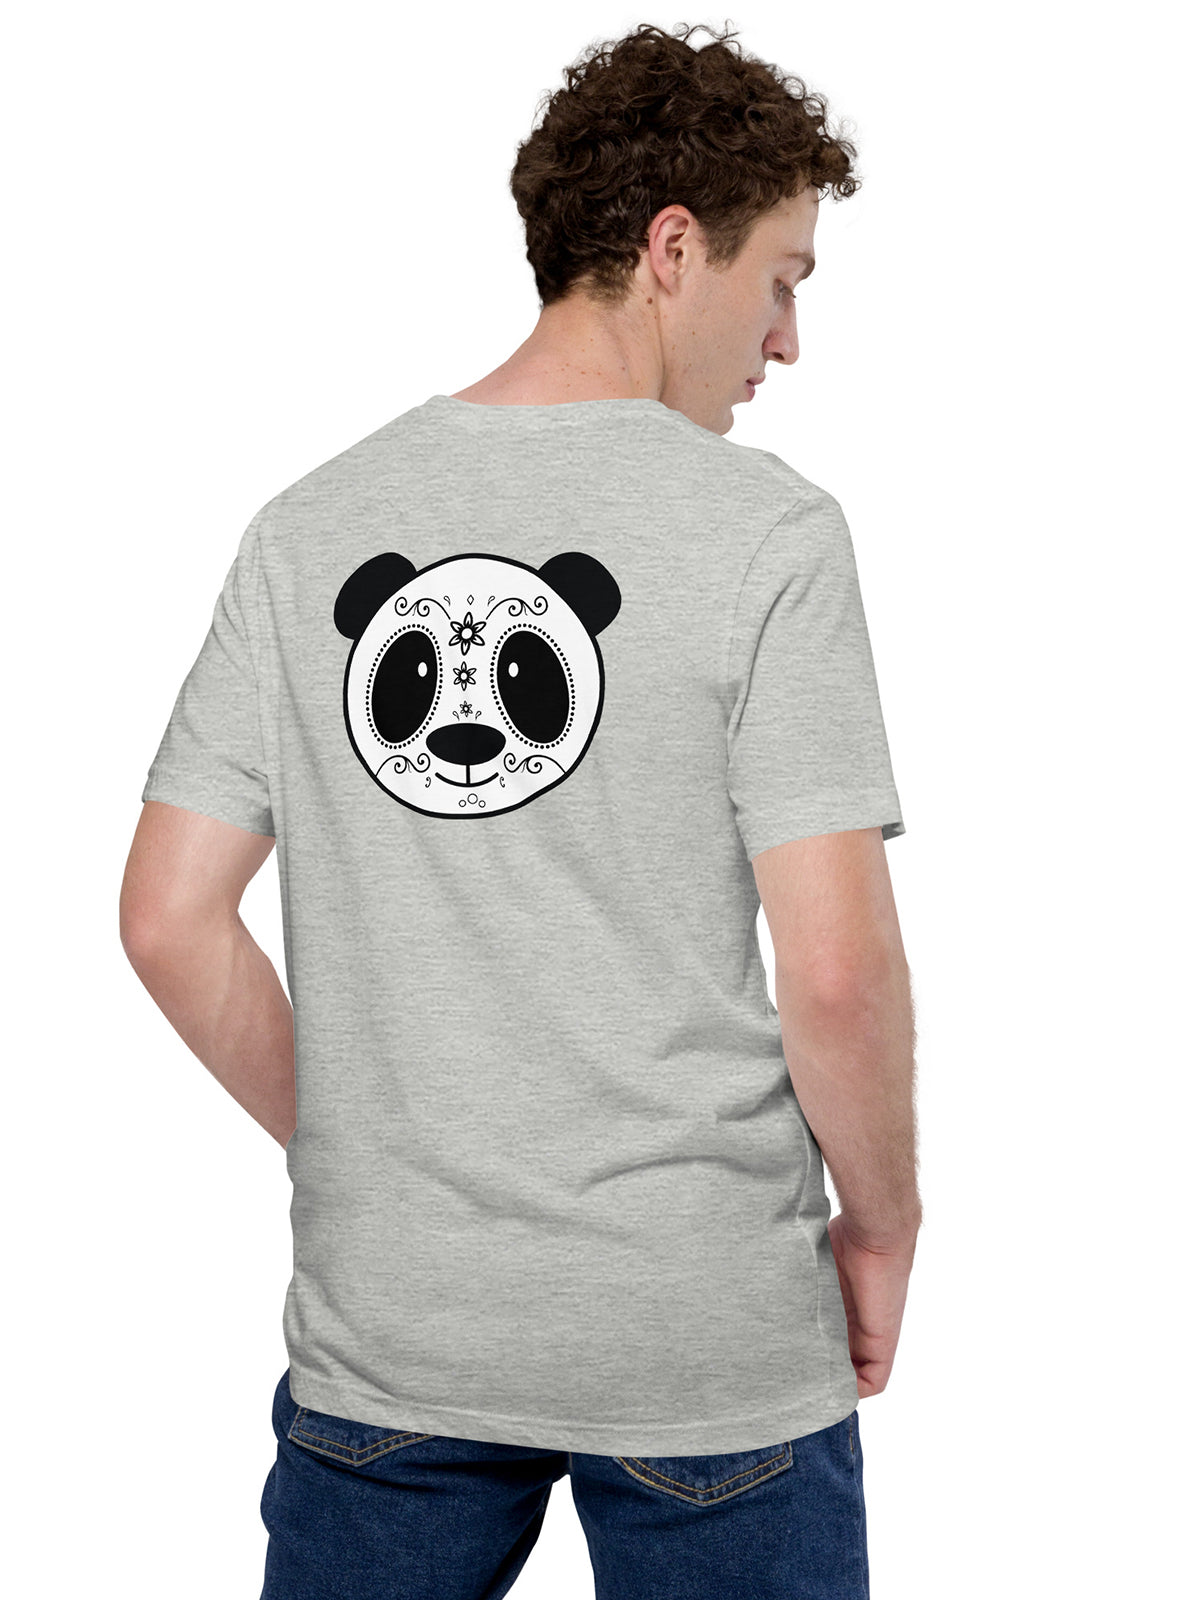 Day Of The Dead Panda - Special Edition Premium Gray Unisex t-shirt